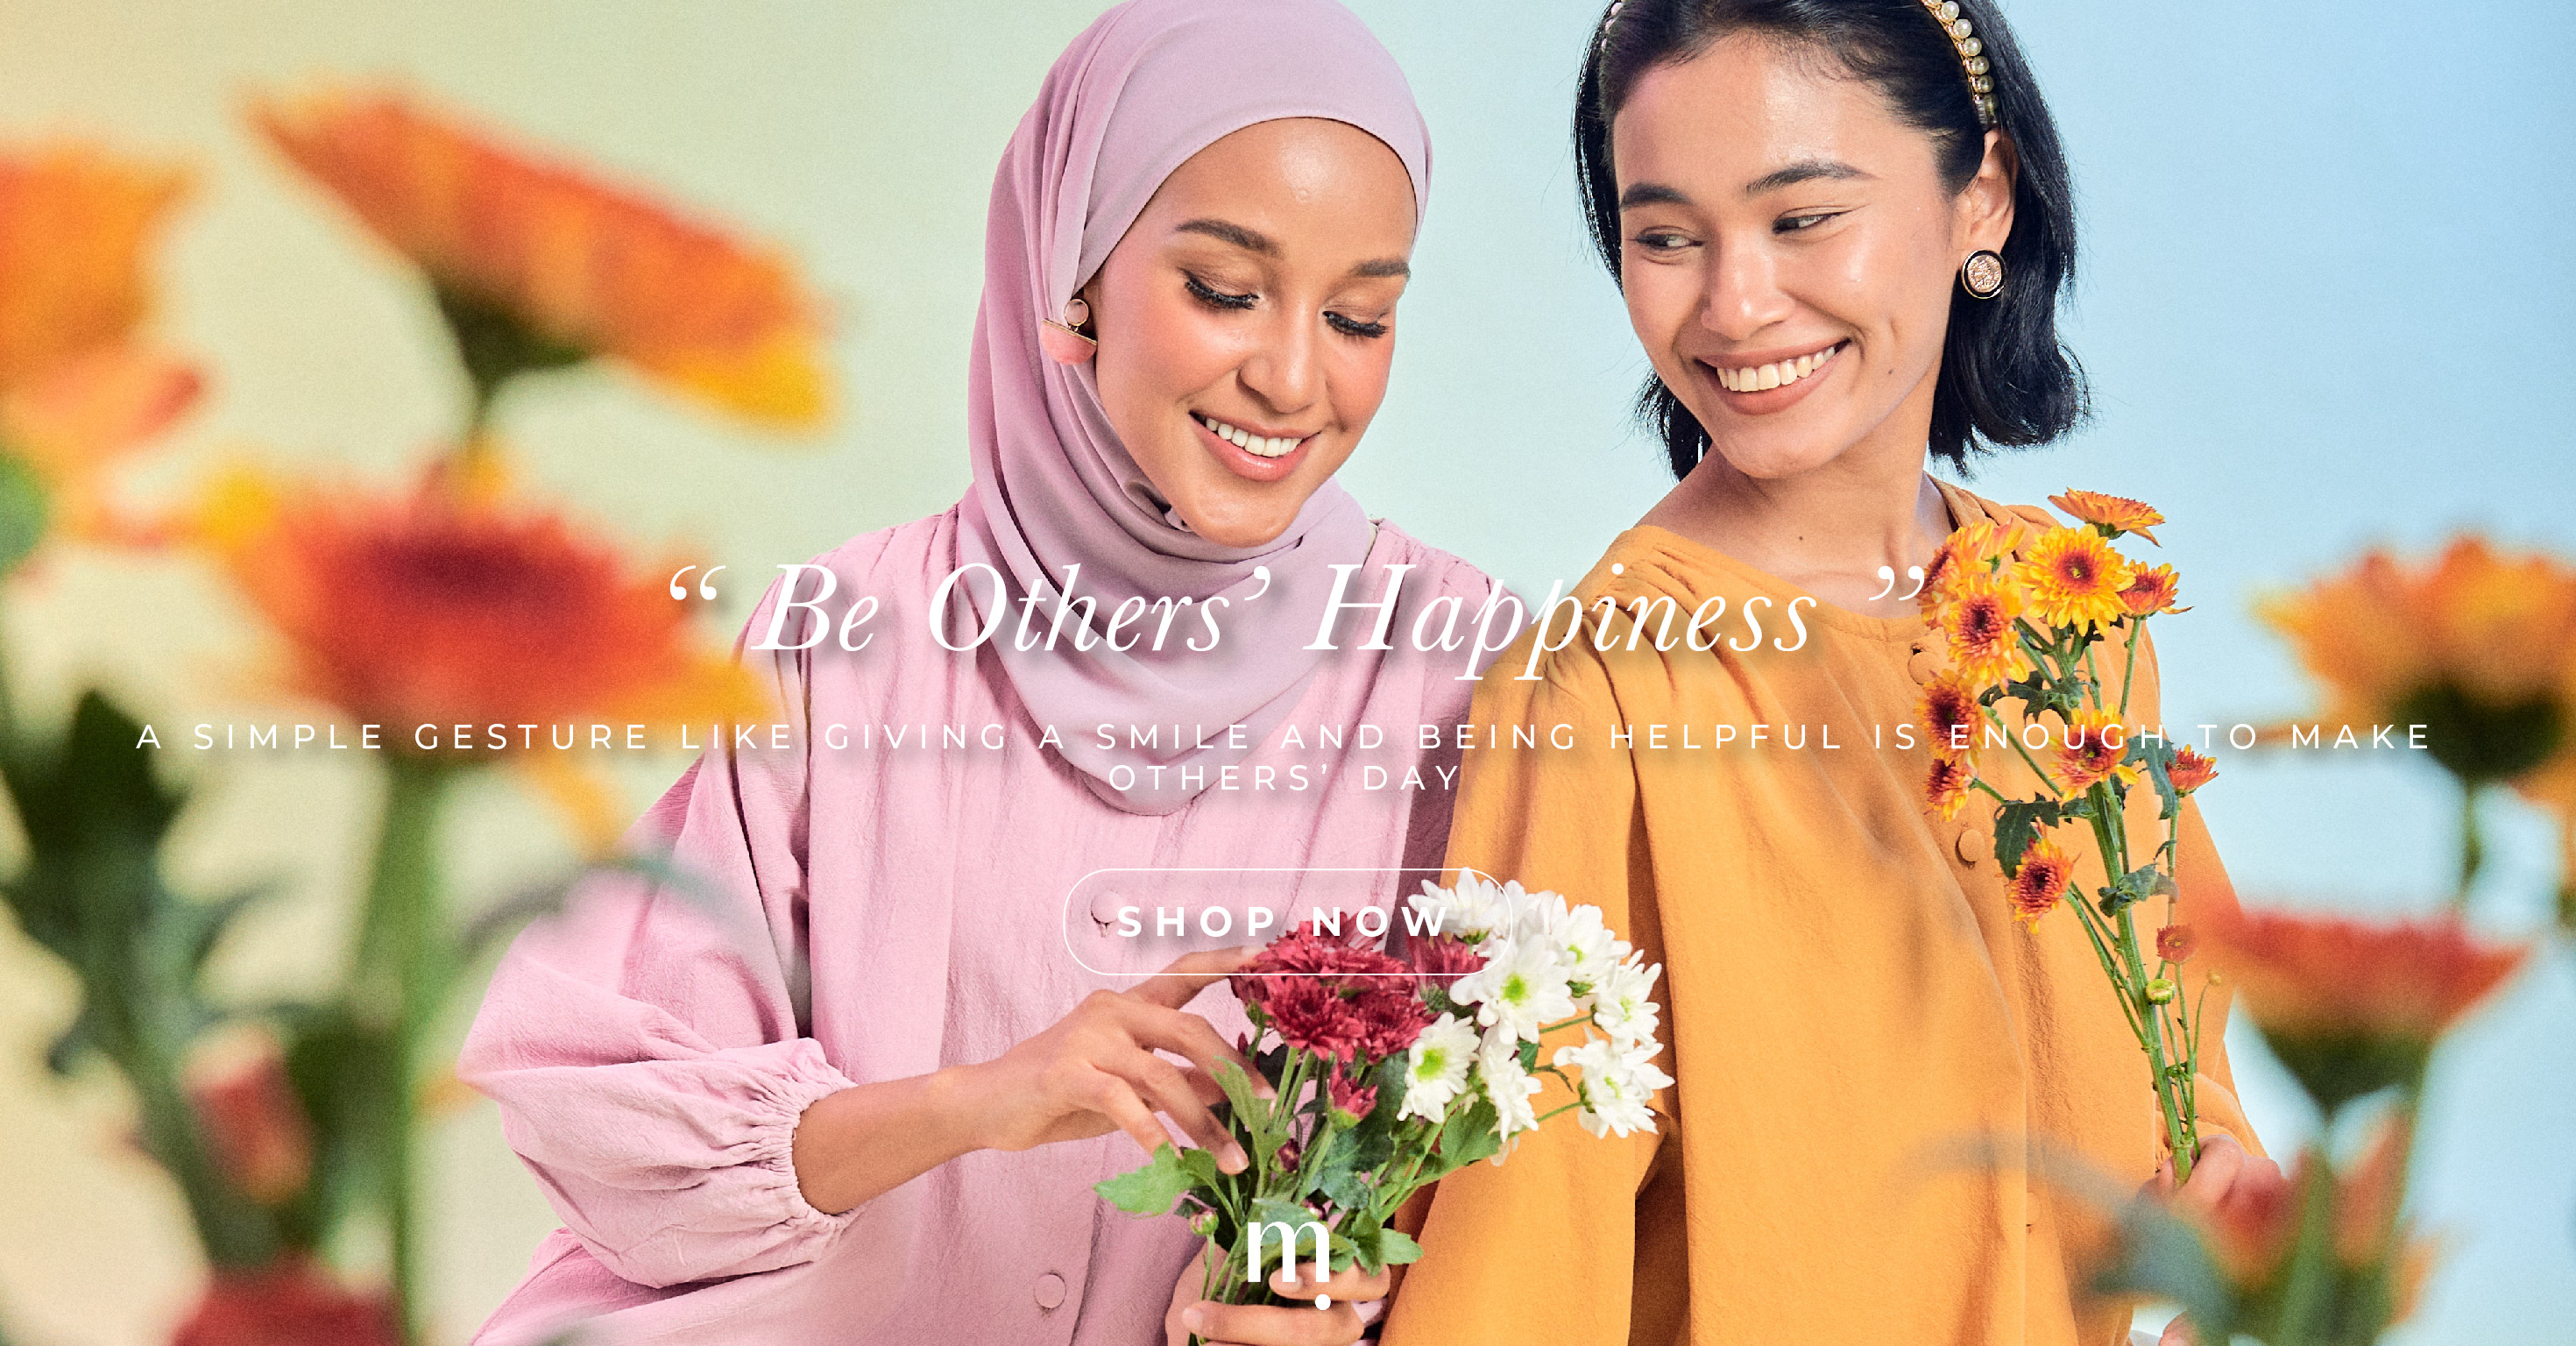 BE OTHERS' HAPPINESS